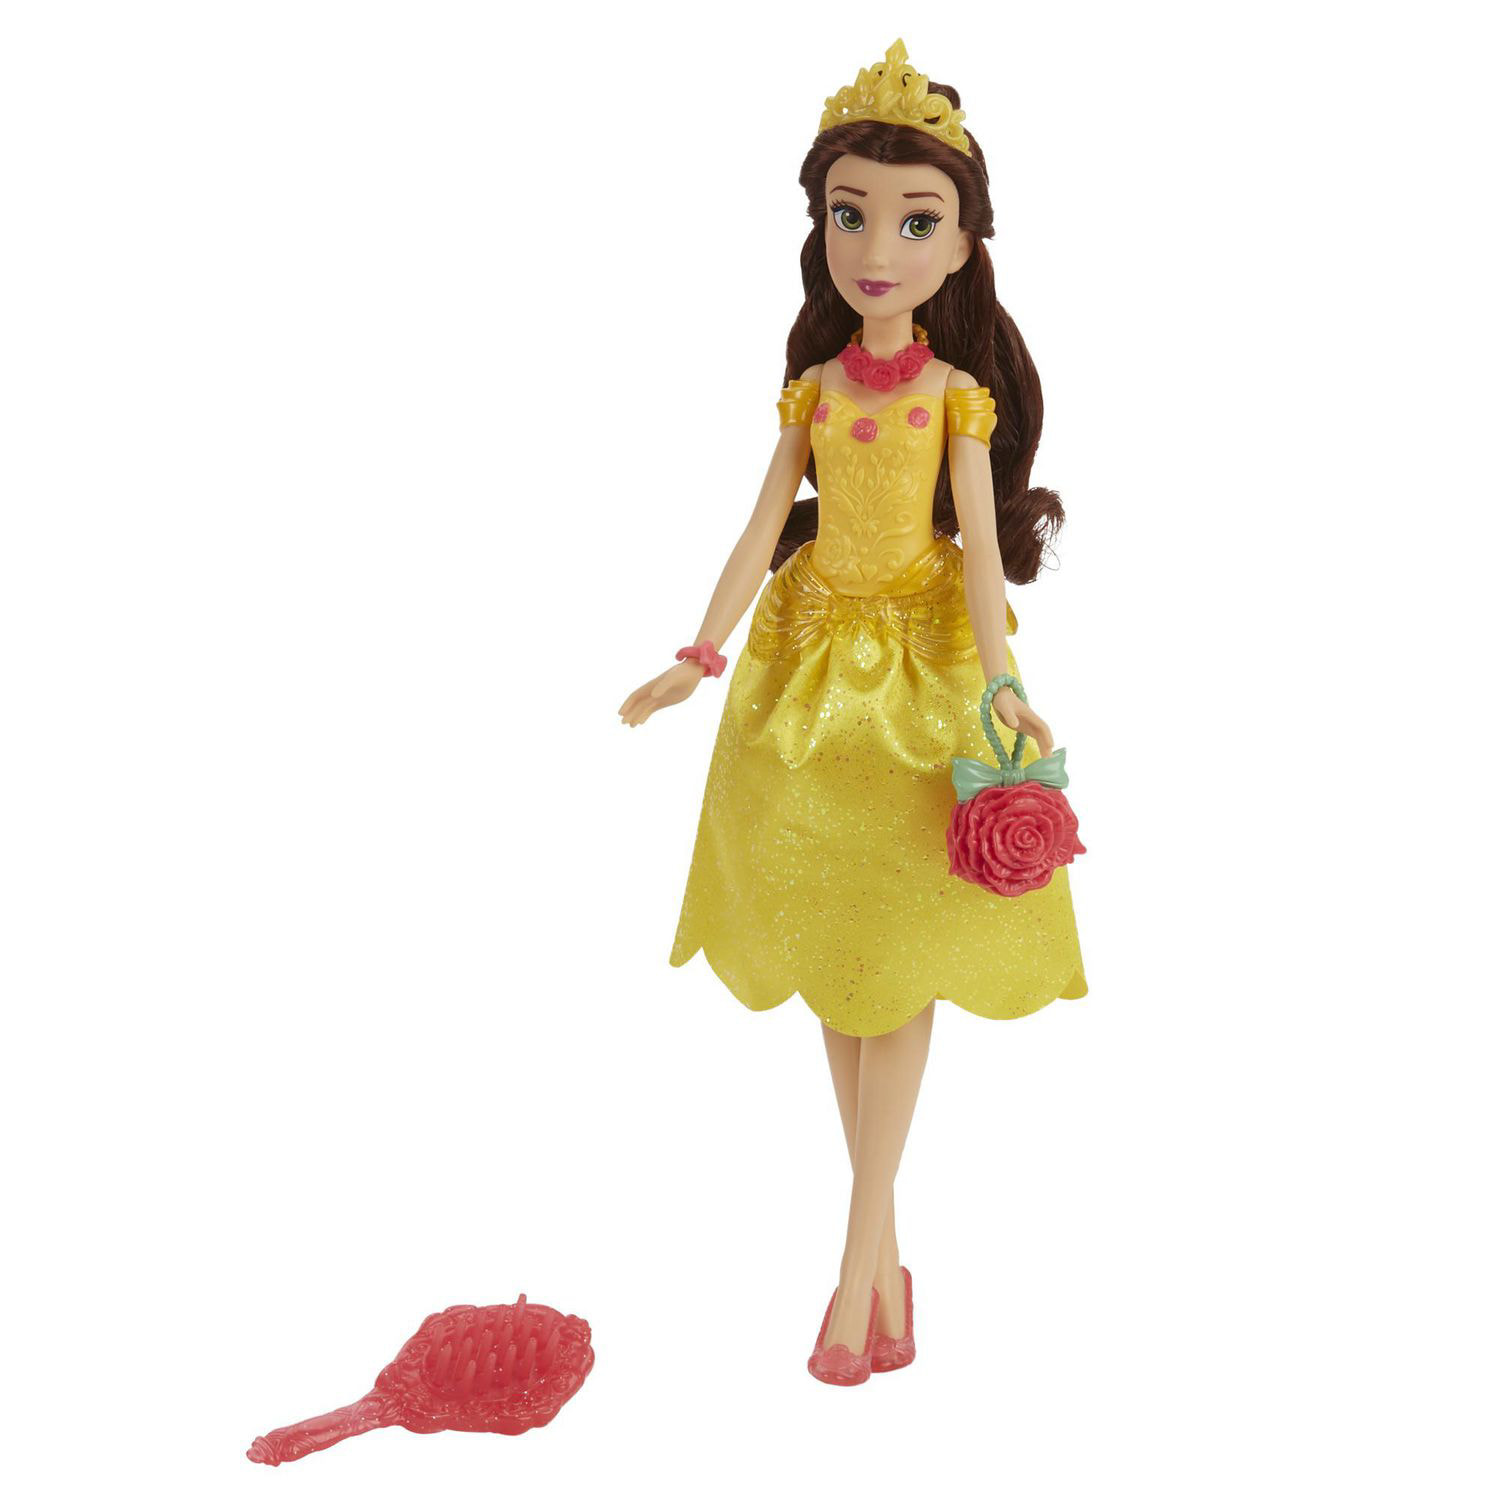 Disney Princess Core Doll Assortment - Belle Doll For Girls 3 years up